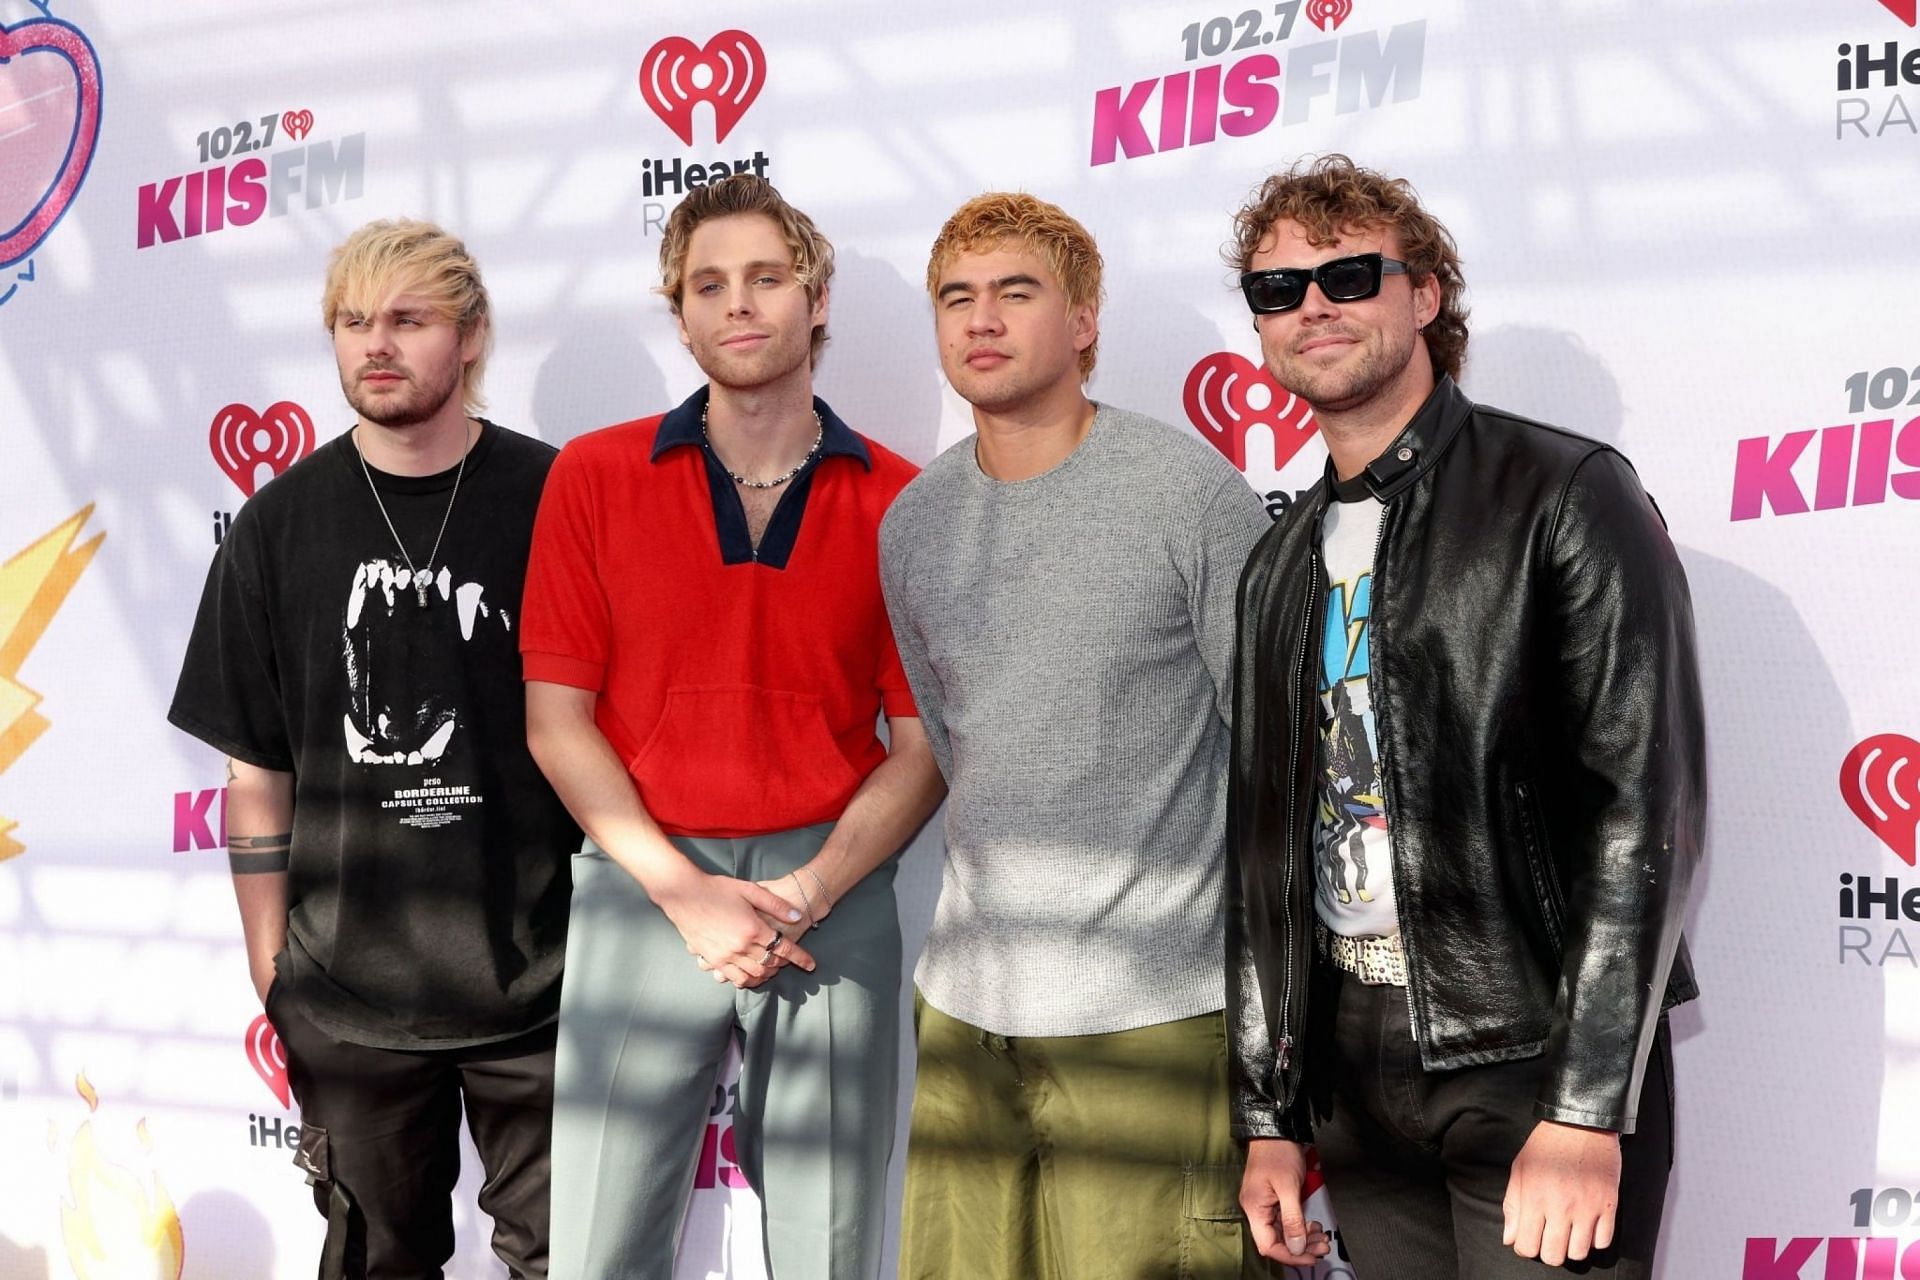 5SOS at the 2022 iHeartRadio Wango Tango at Dignity Health Sports Park on June 04, 2022 in Carson, California.(Image via Getty Images)